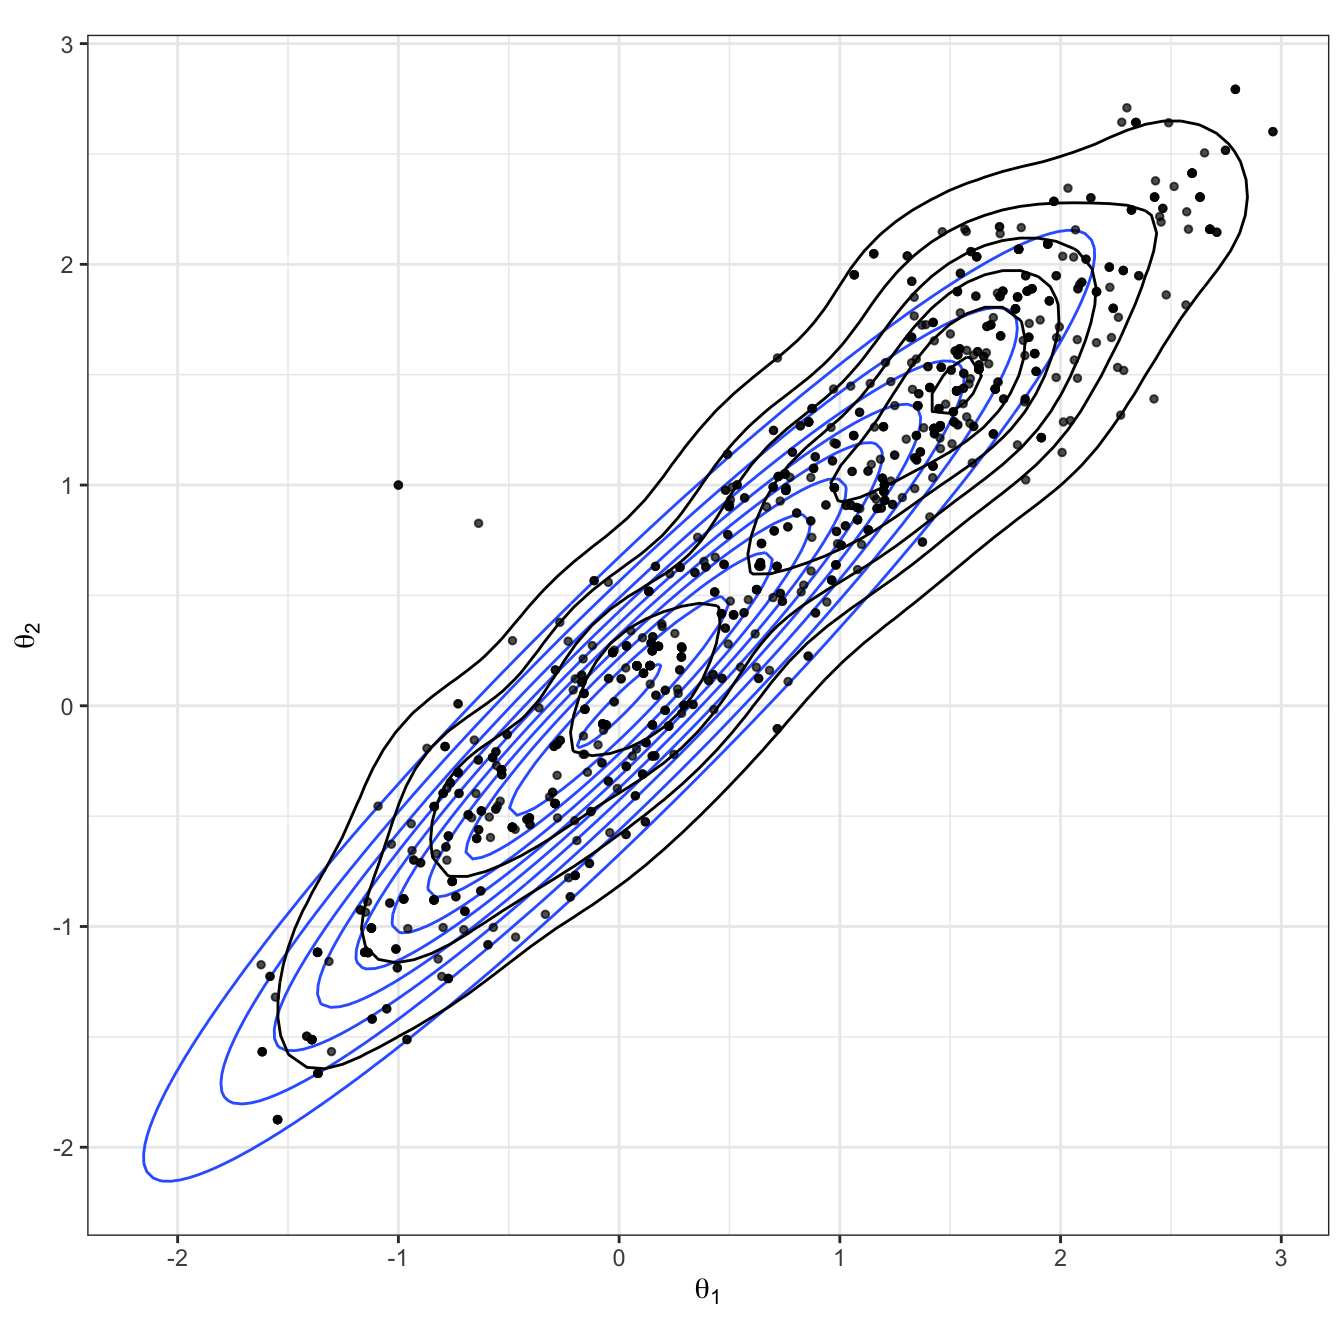 Bivariate Gaussian sampled using a random-walk Metropolis-Hastings algorithm. The true Gaussian density is shown in blue, and overlaid in black with both the samples and estimated density.